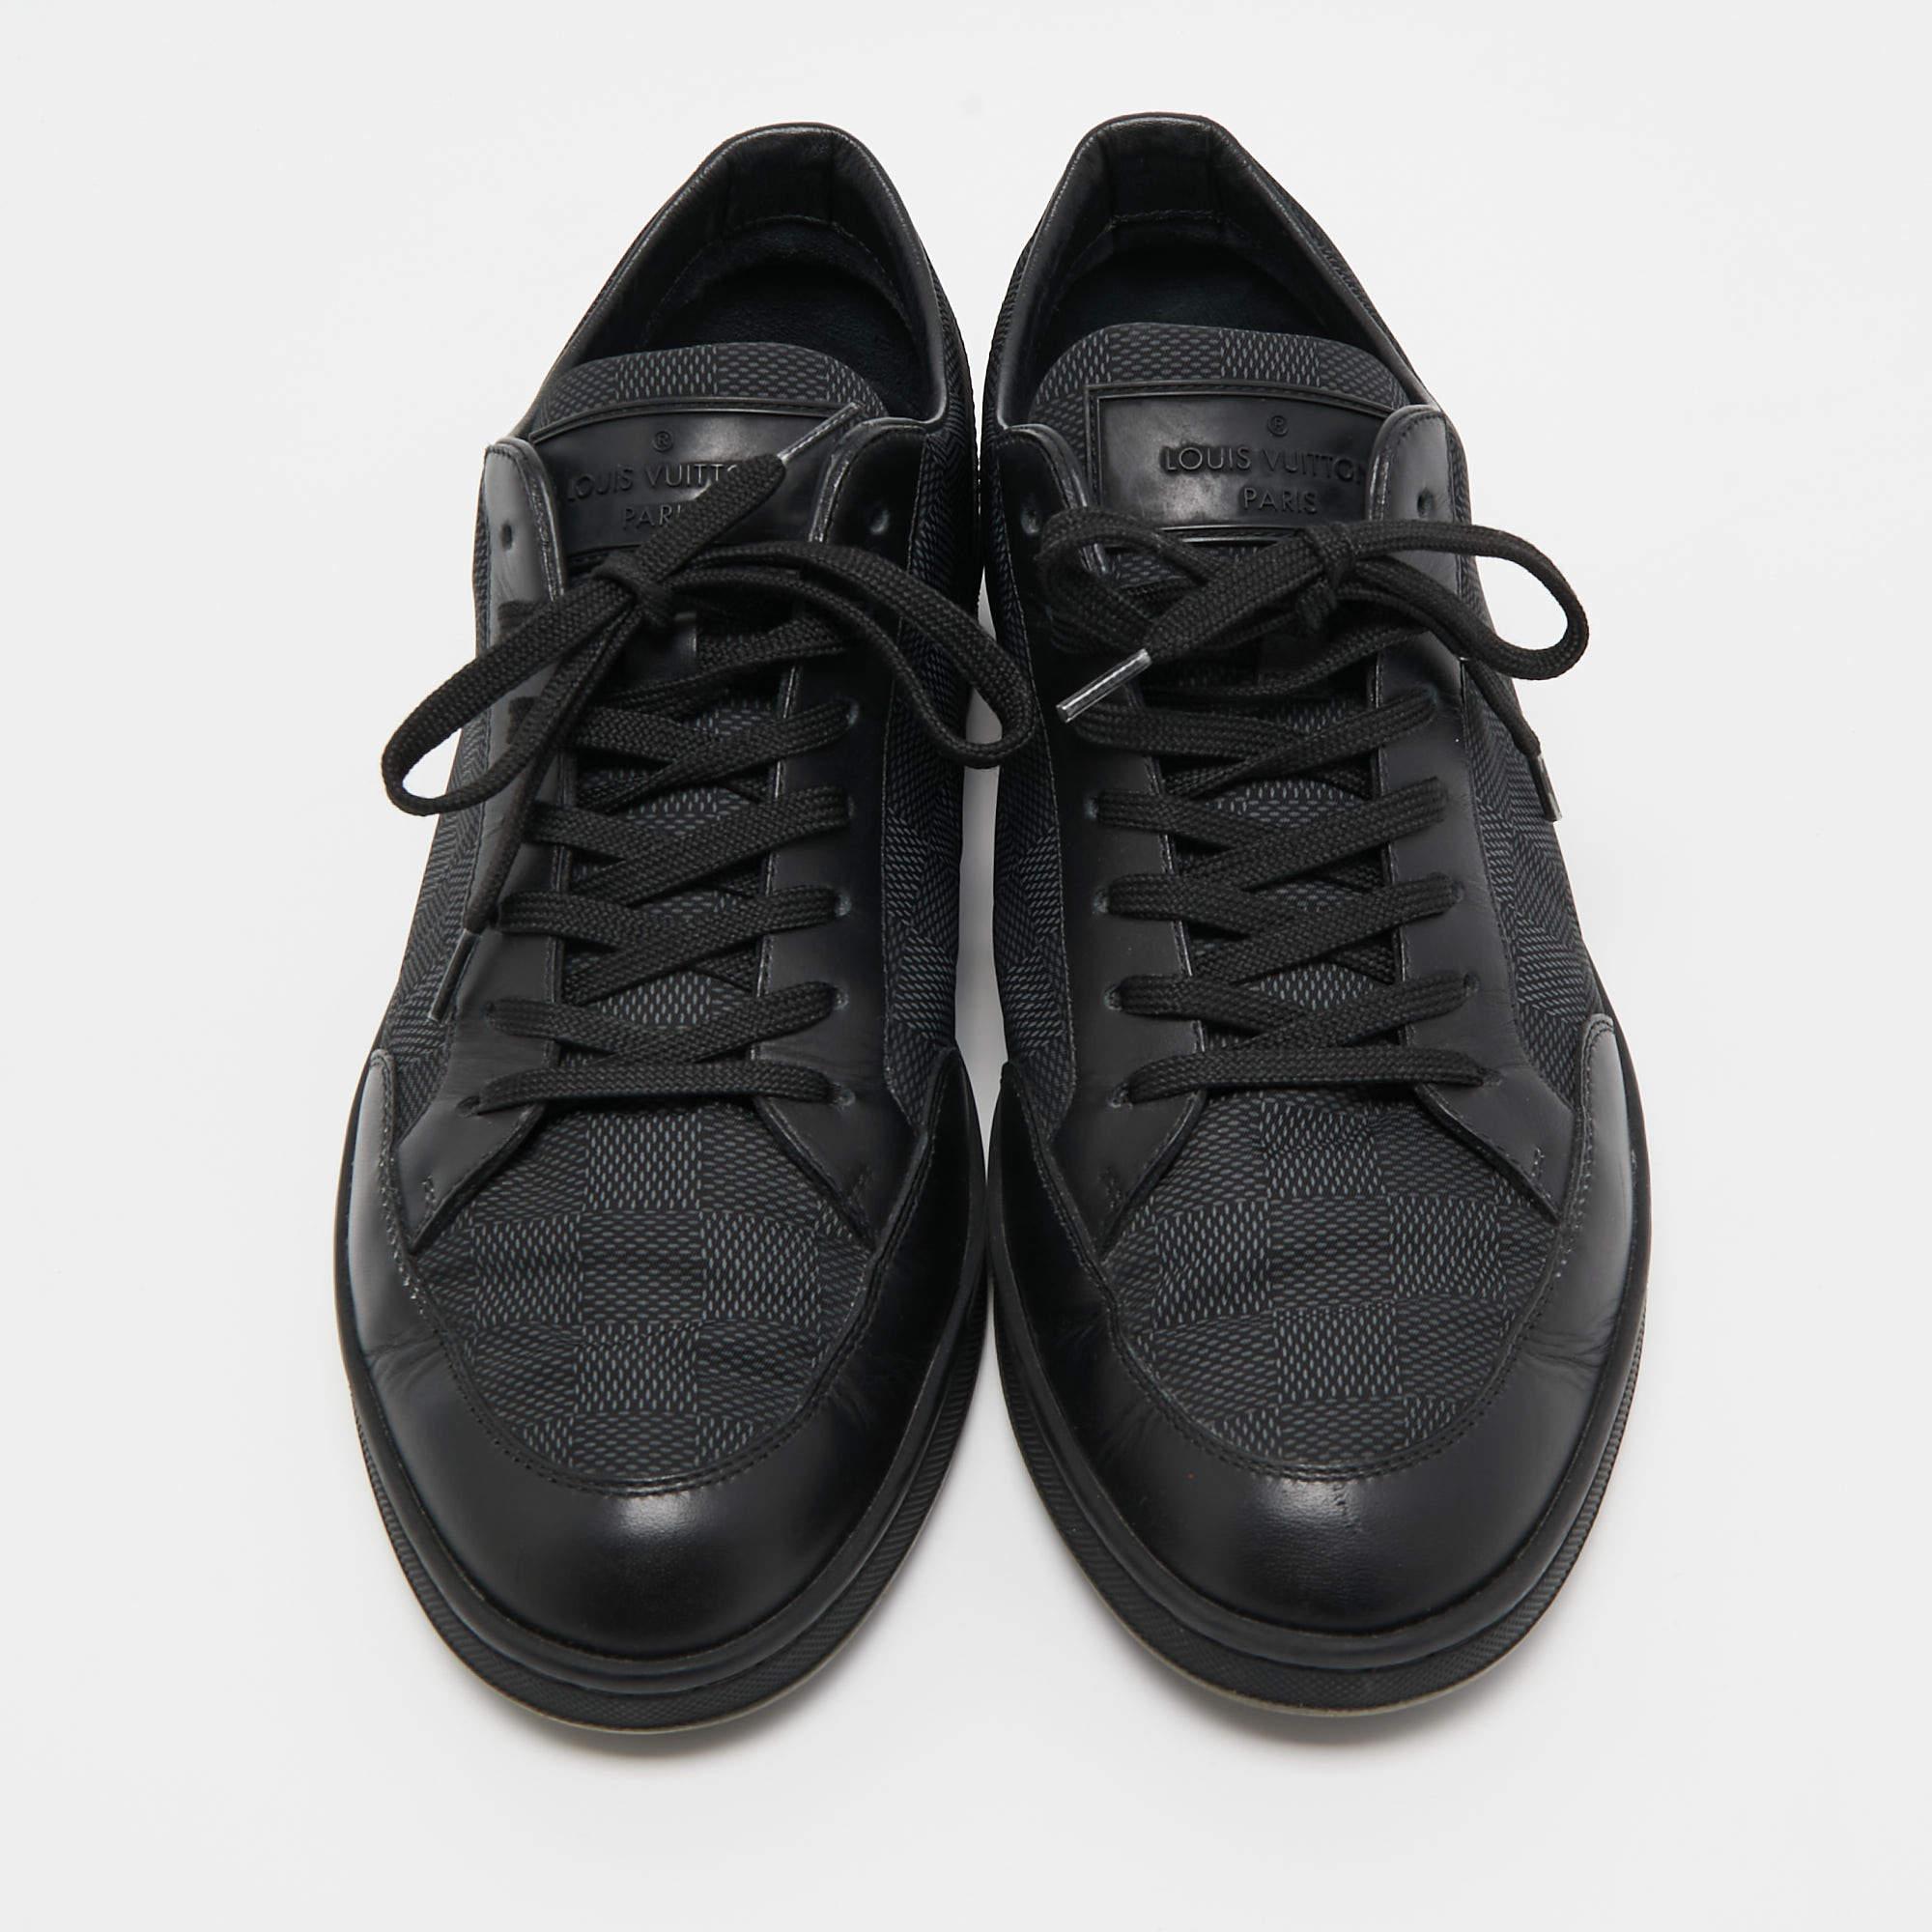 Louis Vuitton Black Leather and Nylon Low Top Sneakers Size 41 For Sale 1